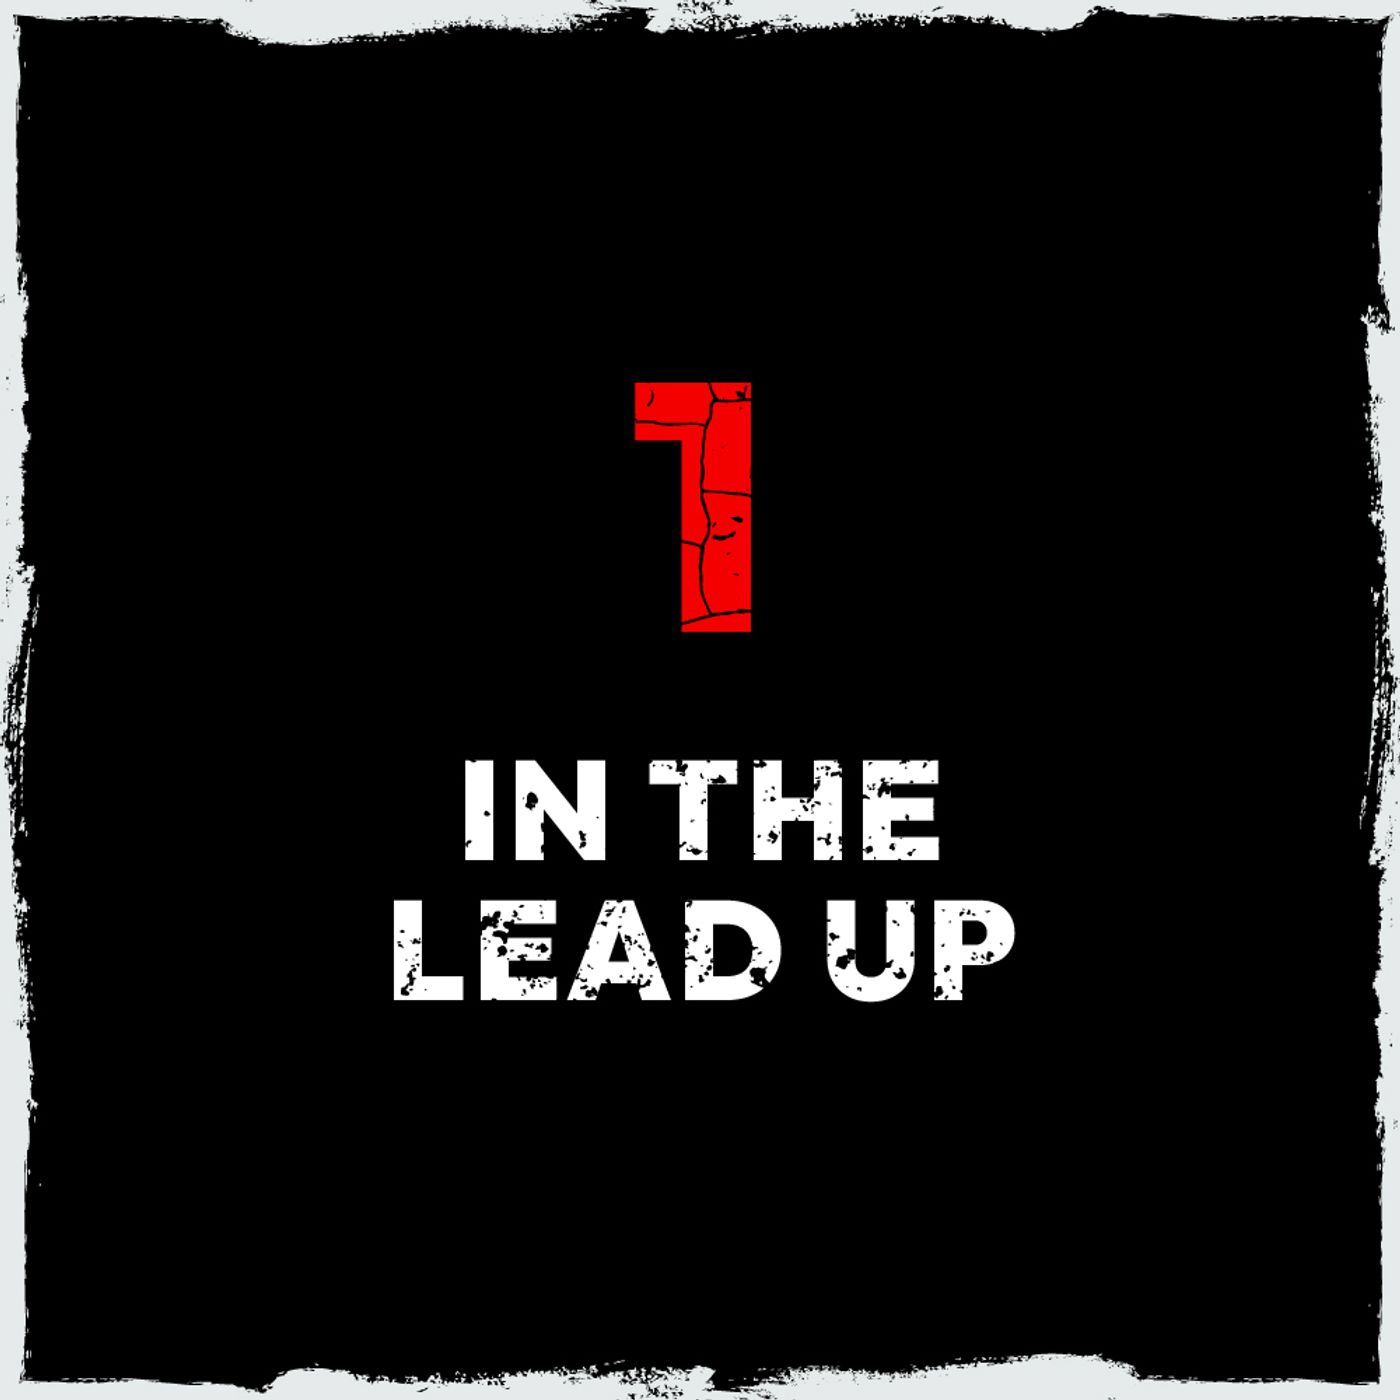 1: Episode 1: In the lead up